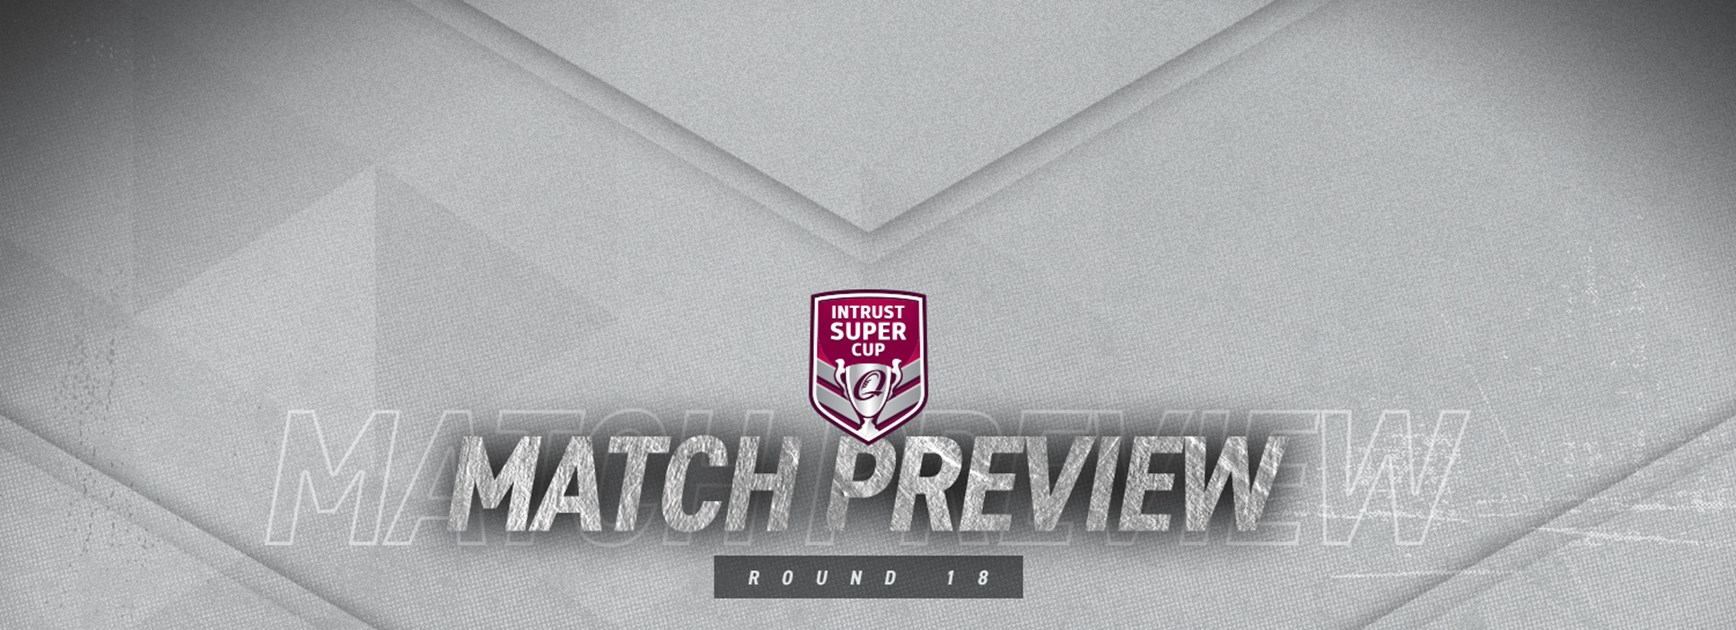 Intrust Super Cup Round 18 preview